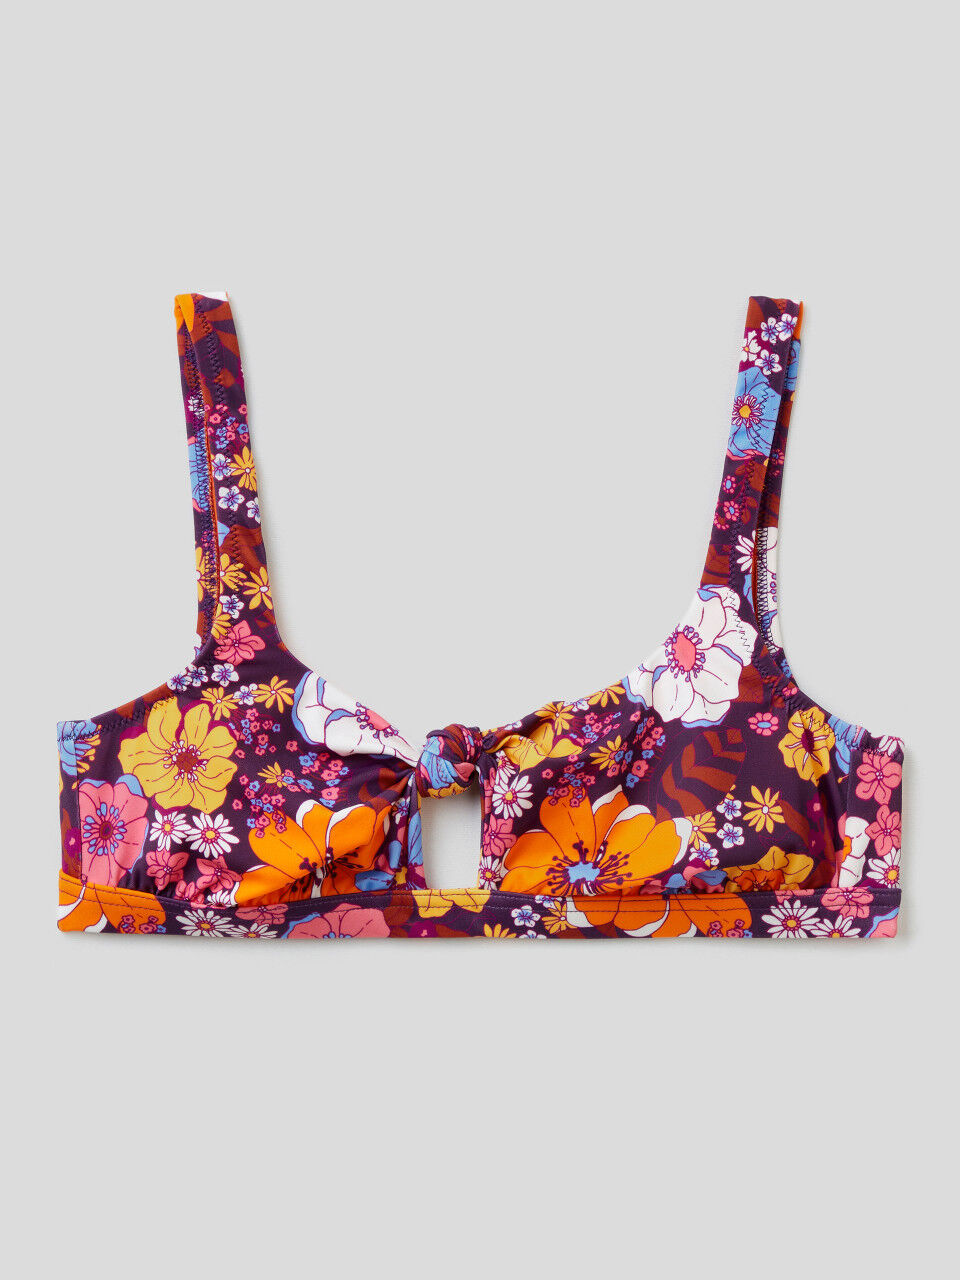 Paradise  Lilac bird and floral print organic cotton lingerie set  bralette and panties  Made to order